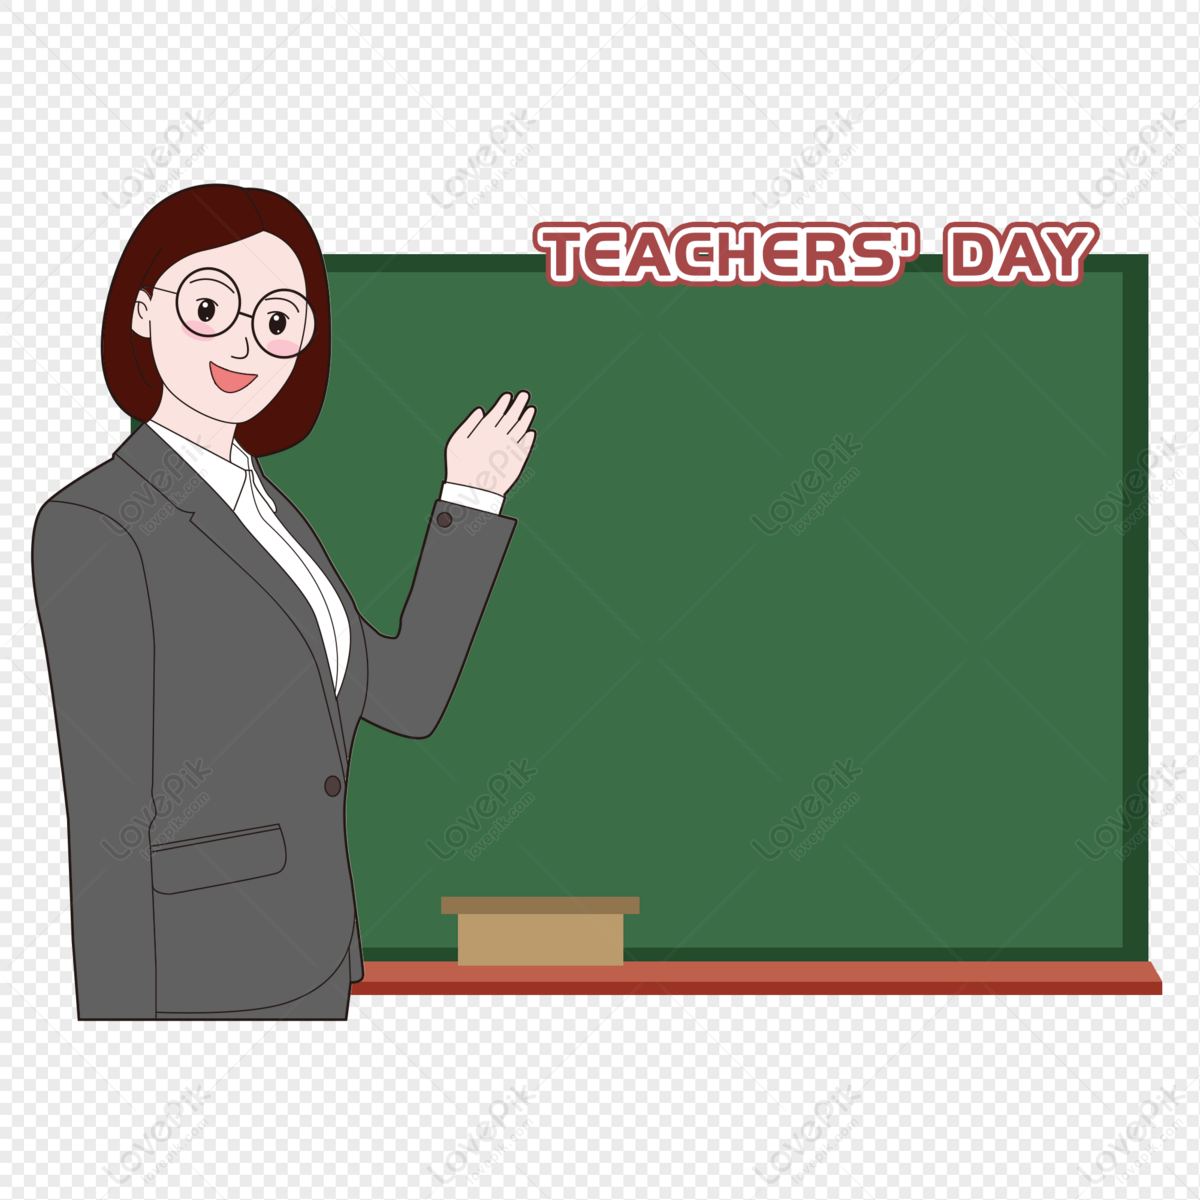 Teachers Day Cartoon Border PNG Image And Clipart Image For Free Download -  Lovepik | 401611238